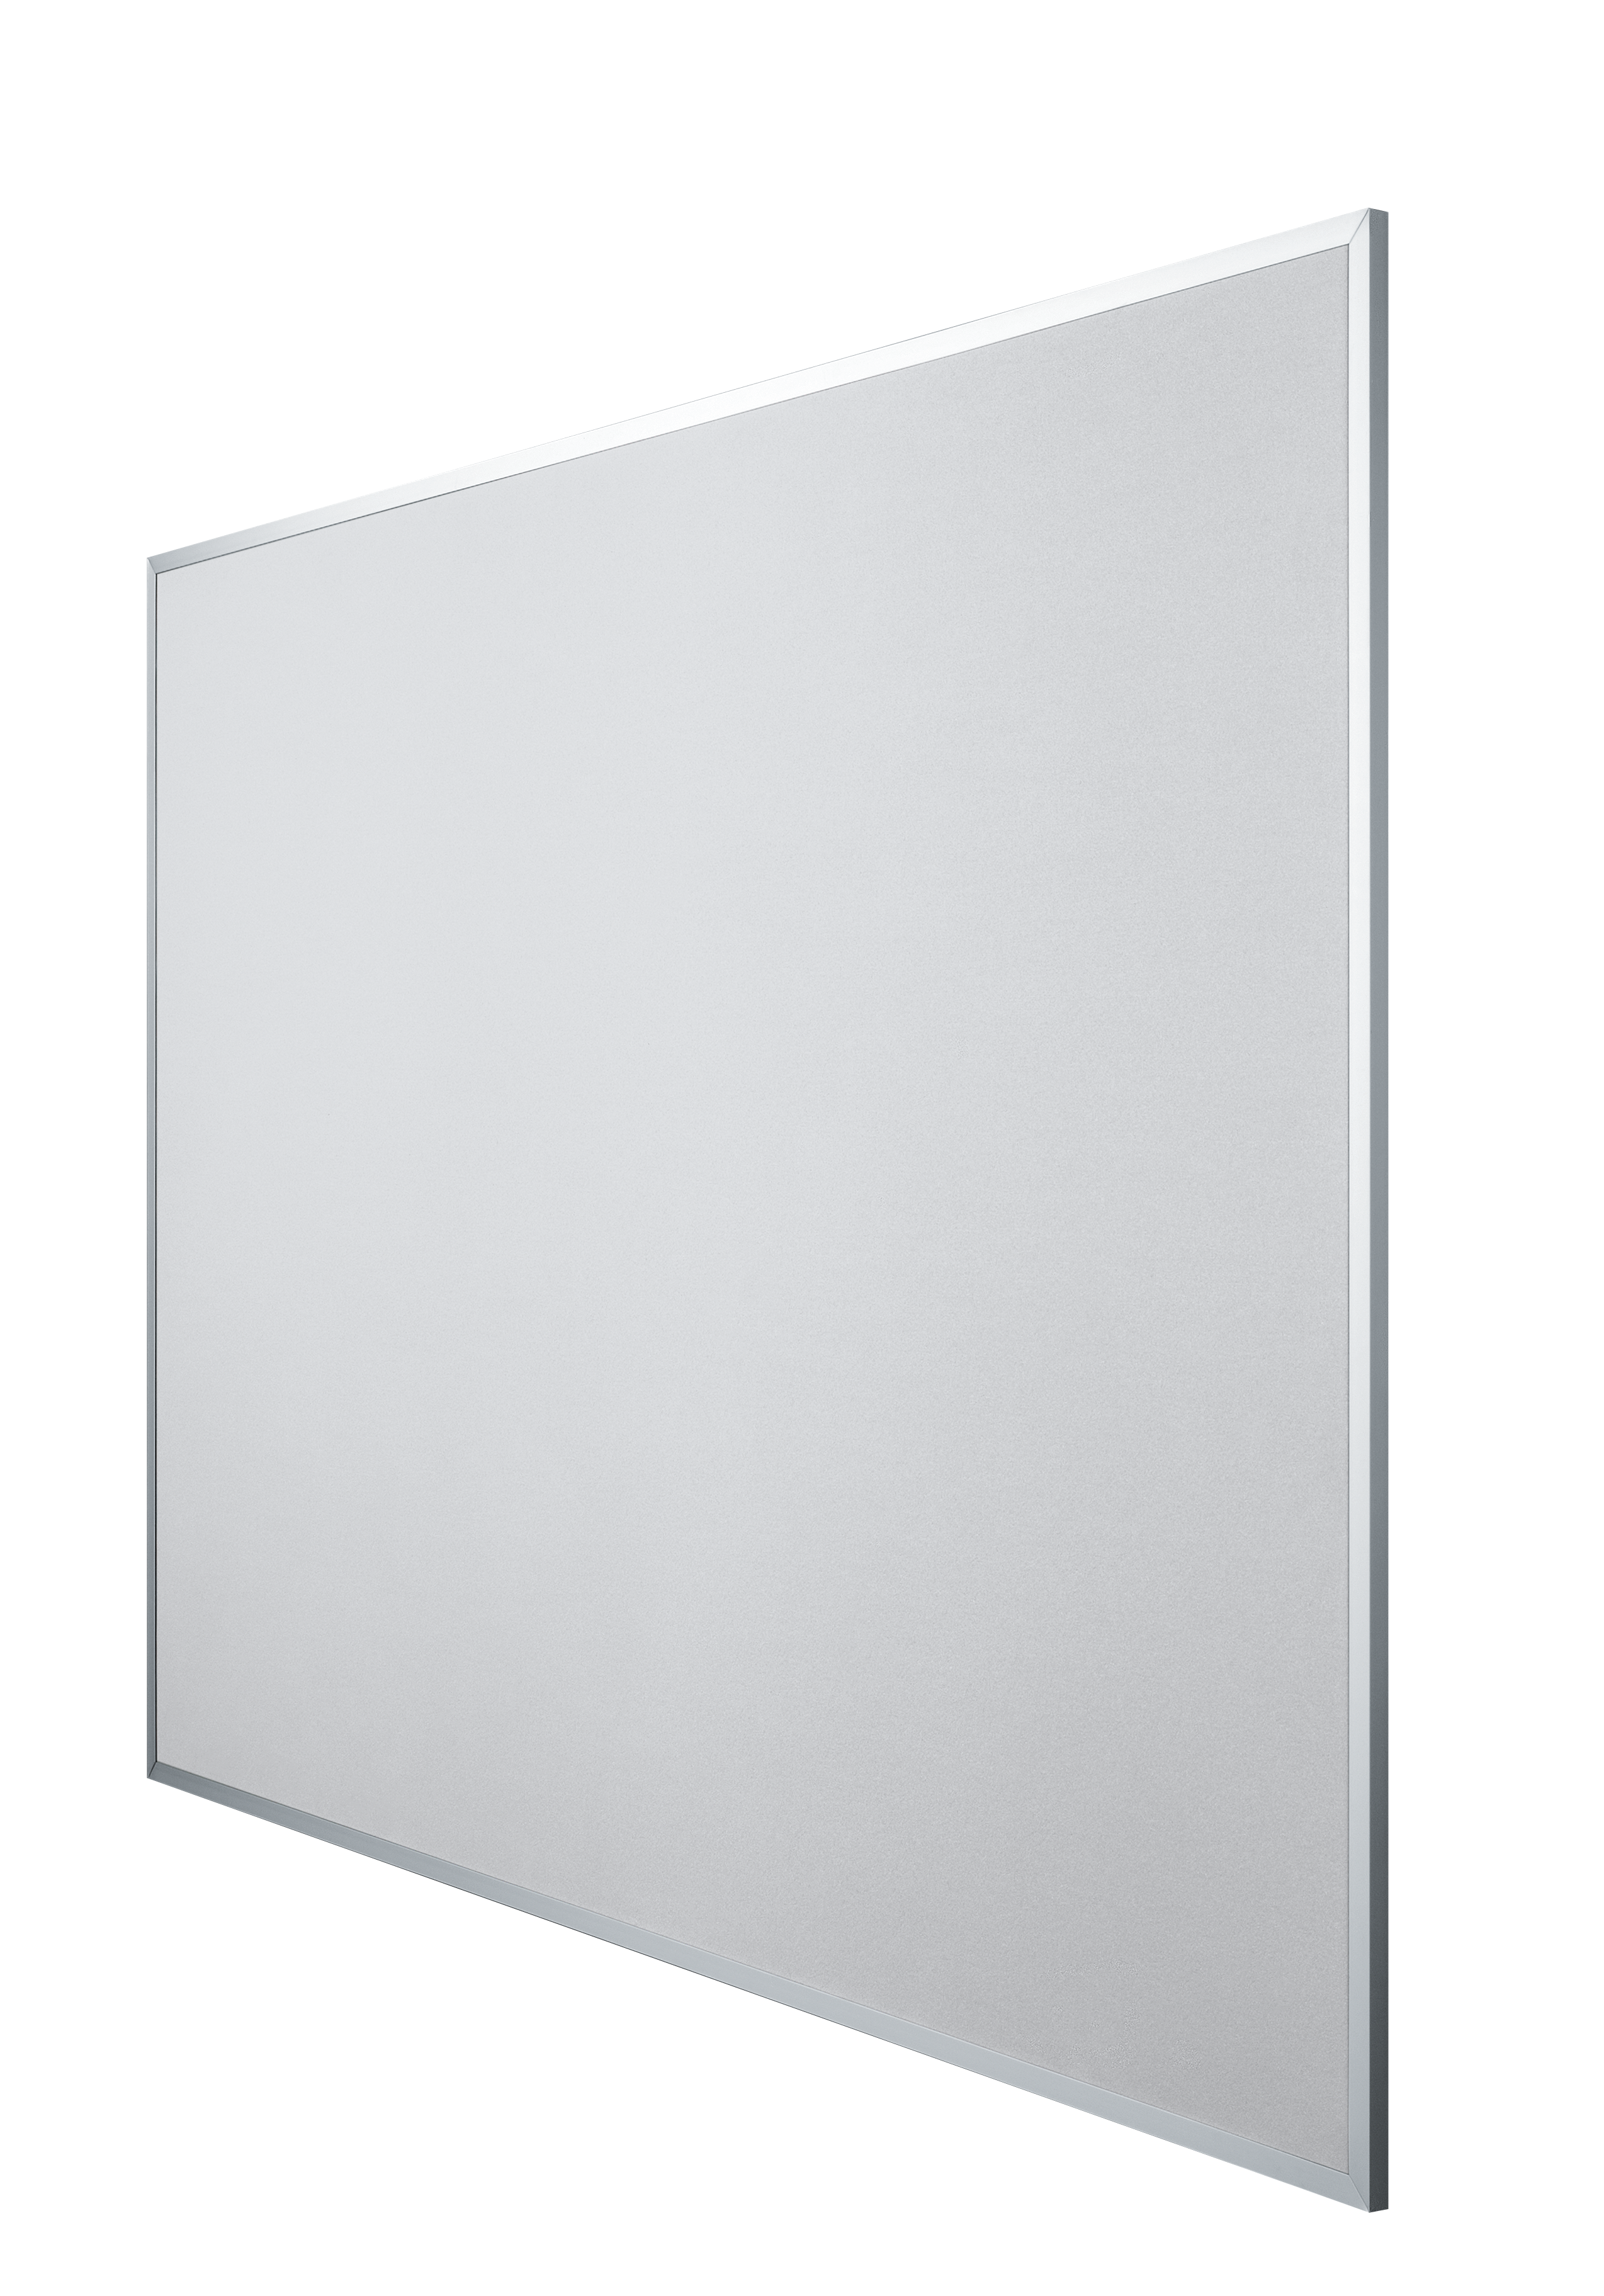 ASI 9800 Quick Ship Porcelain Markerboard 4-Sided Frame 4' X 10', Length: 120